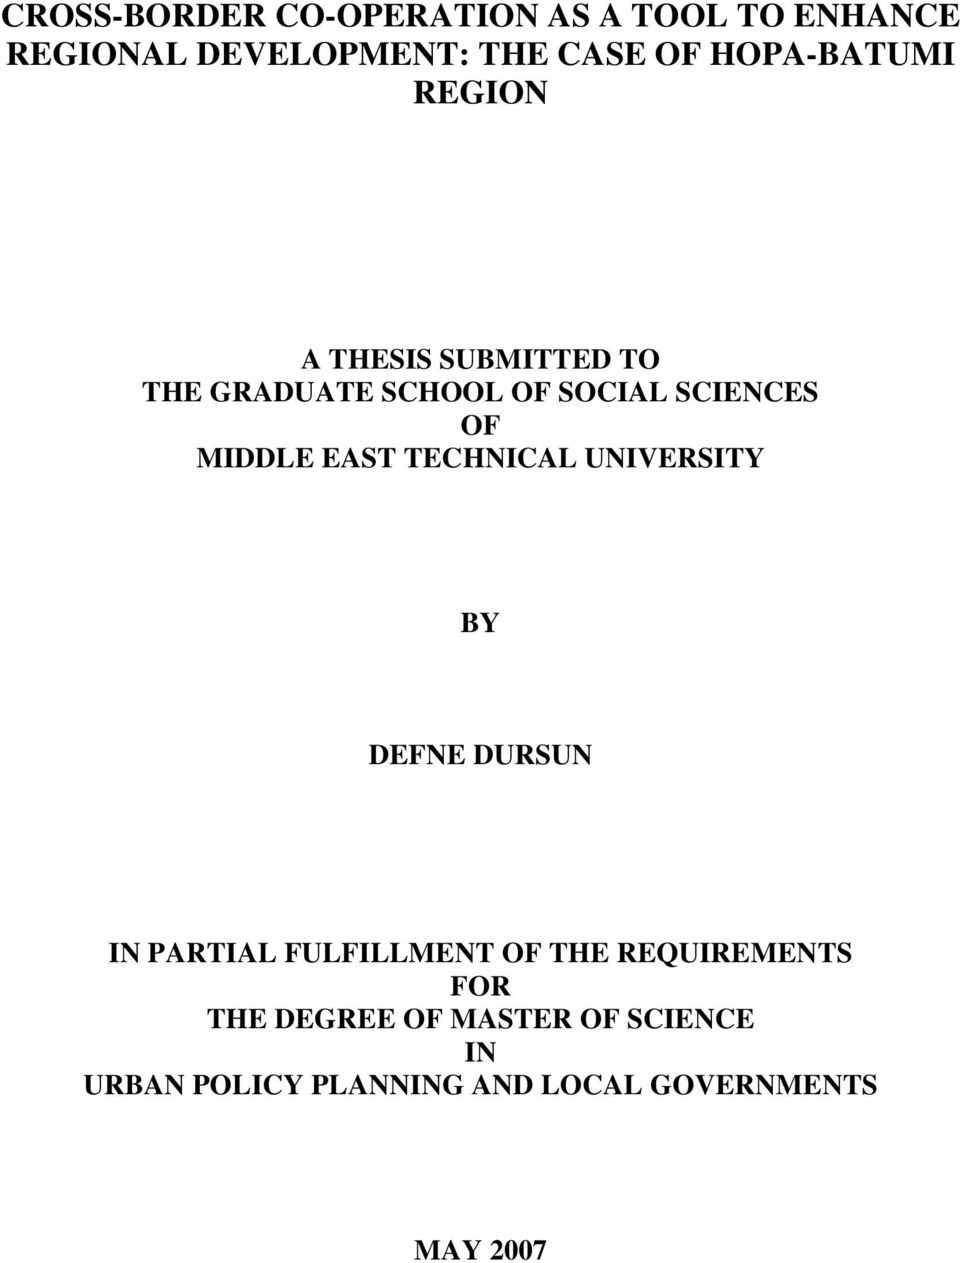 MIDDLE EAST TECHNICAL UNIVERSITY BY DEFNE DURSUN IN PARTIAL FULFILLMENT OF THE